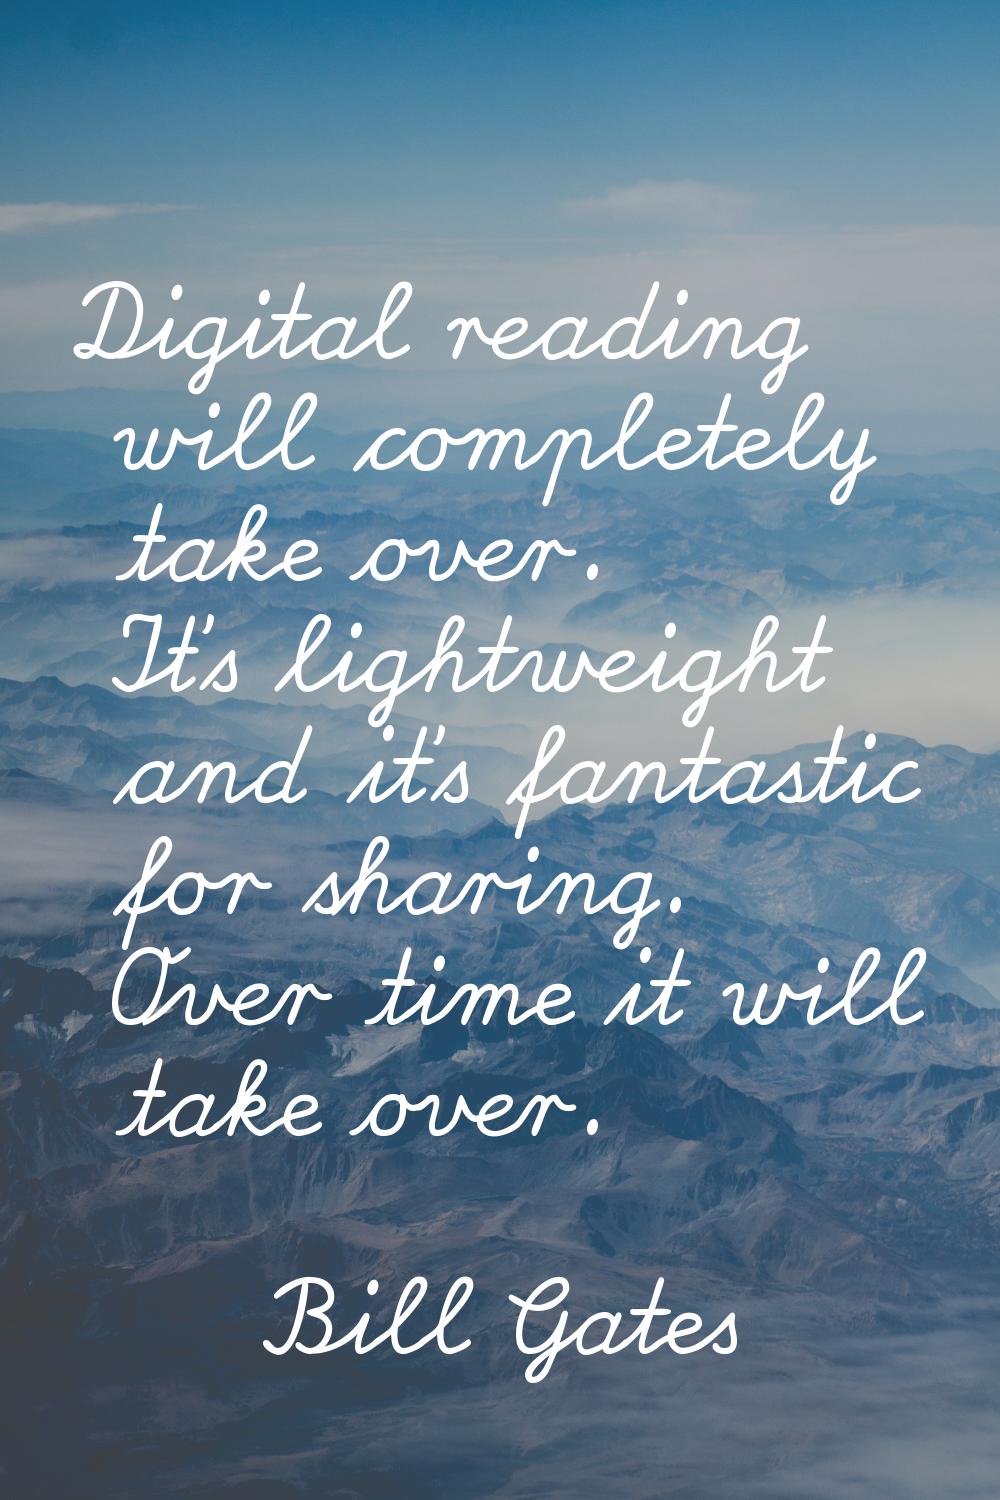 Digital reading will completely take over. It's lightweight and it's fantastic for sharing. Over ti